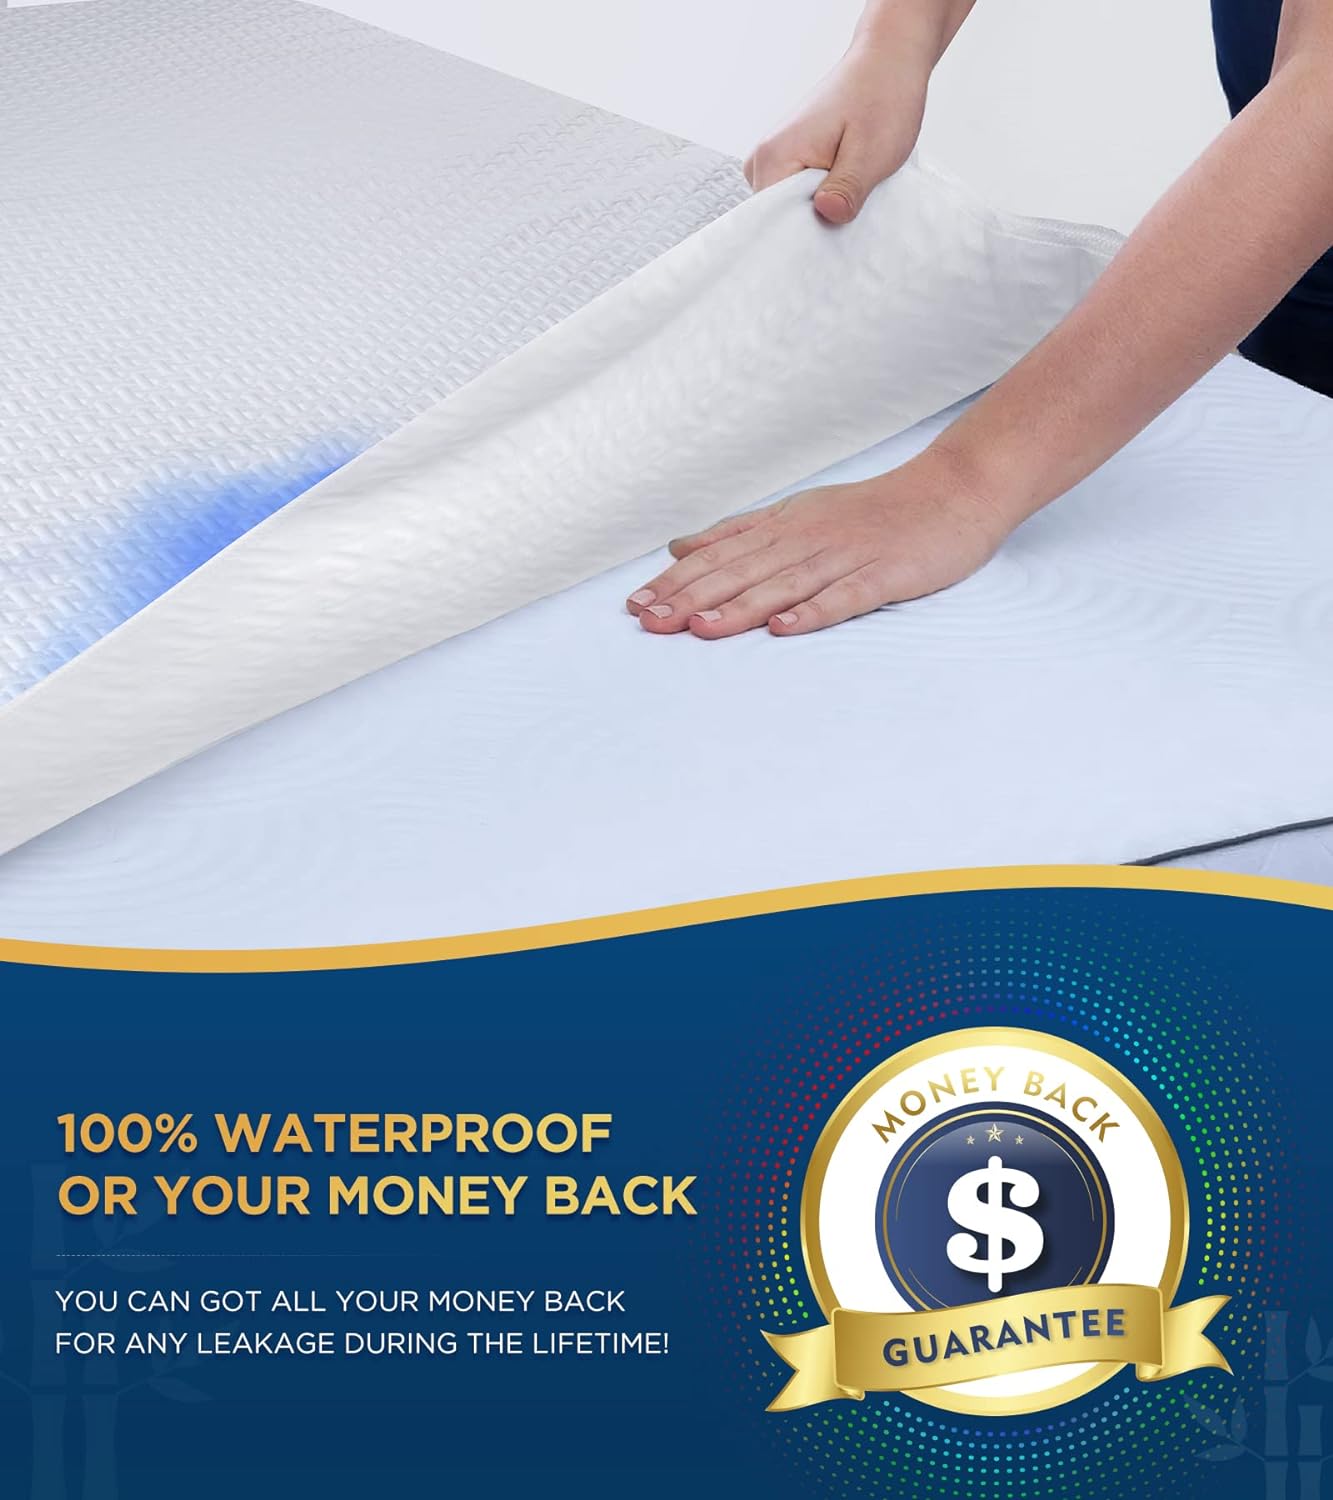 Premium Quality Waterproof Mattress Cover For Double Bed King Size